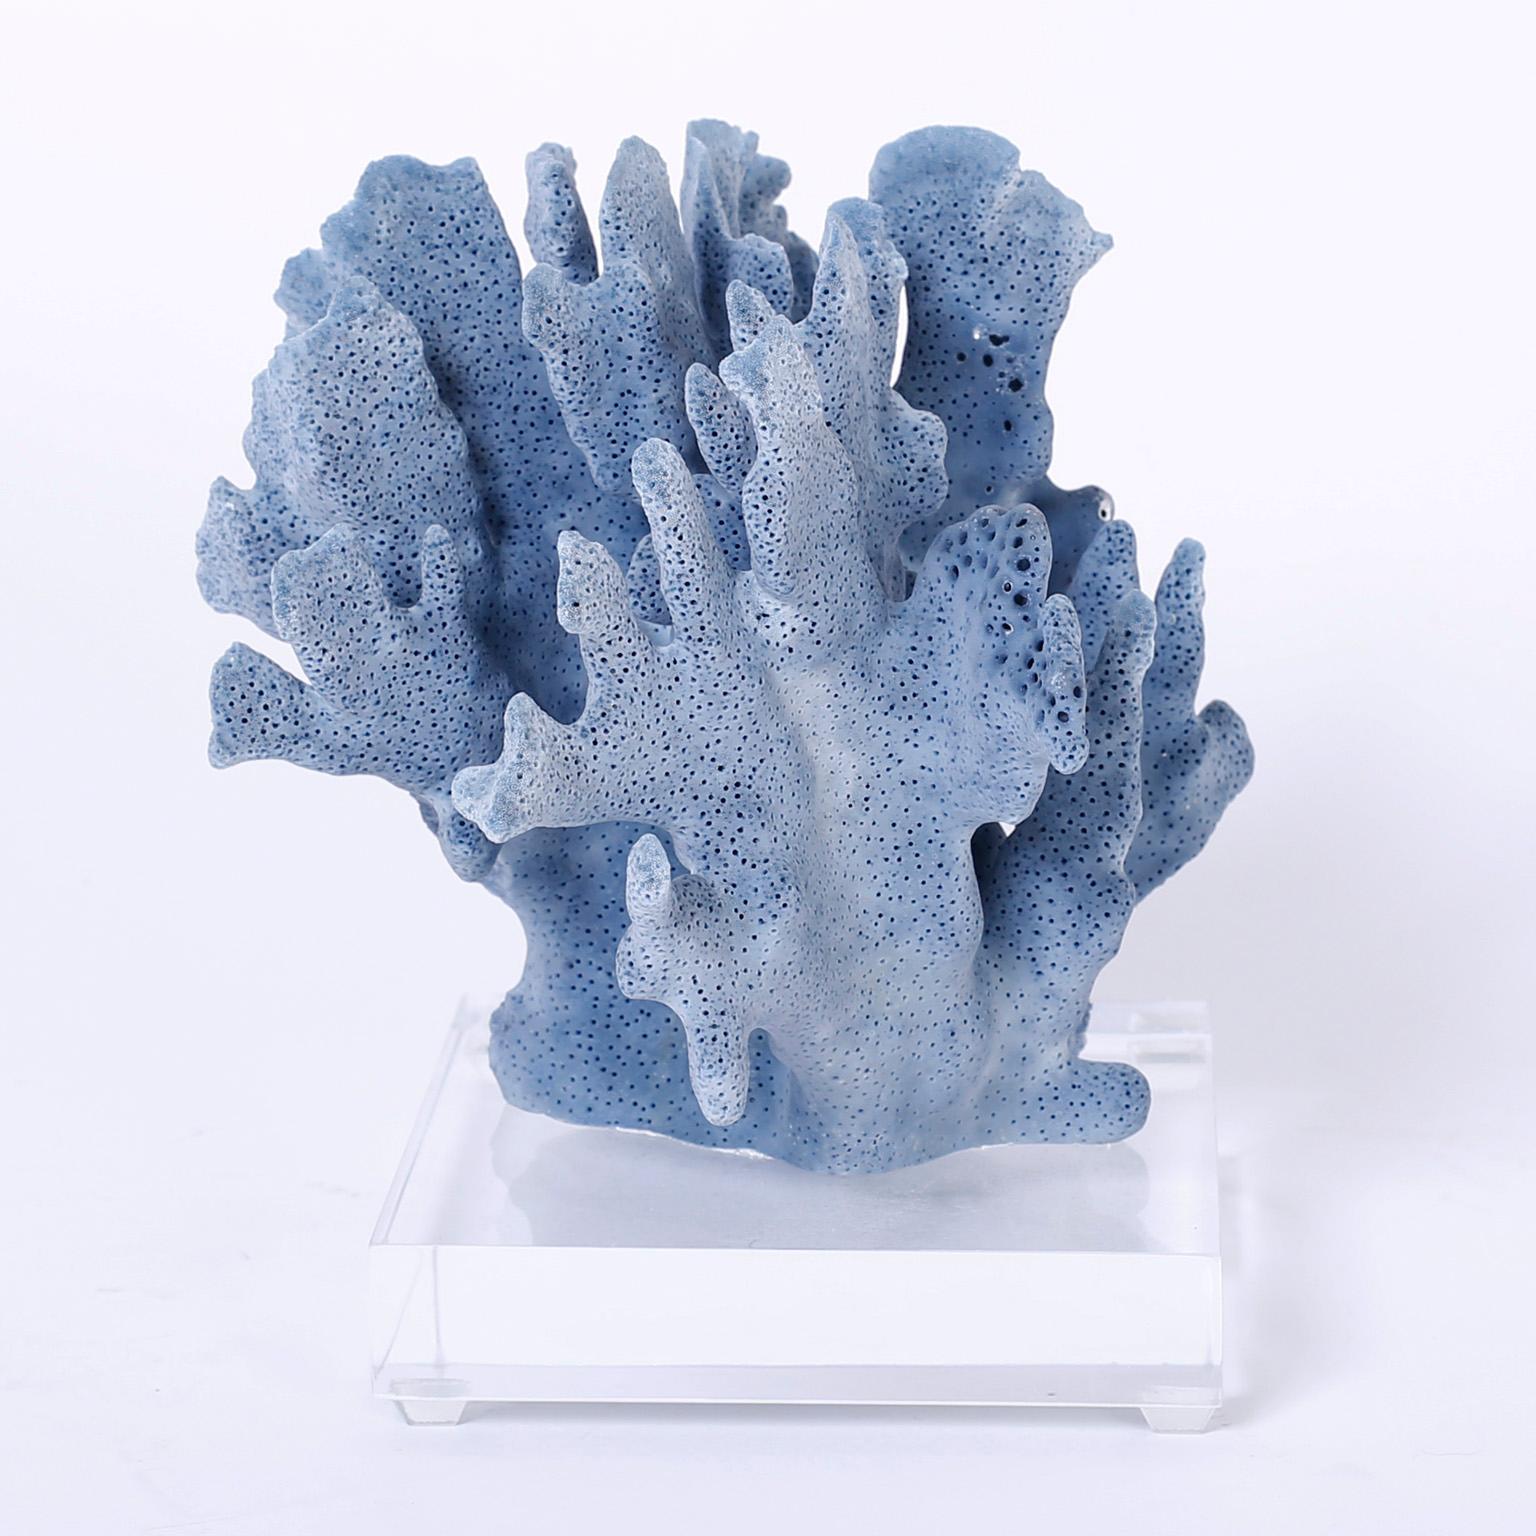 Here are three blue coral specimens each with its own organic sea inspired form, texture, and alluring blue colors. Presented on Lucite stands to enhance the sculptural elements. Priced individually. 

Measures: From left to right:

Ref: BL07 H 7.5,